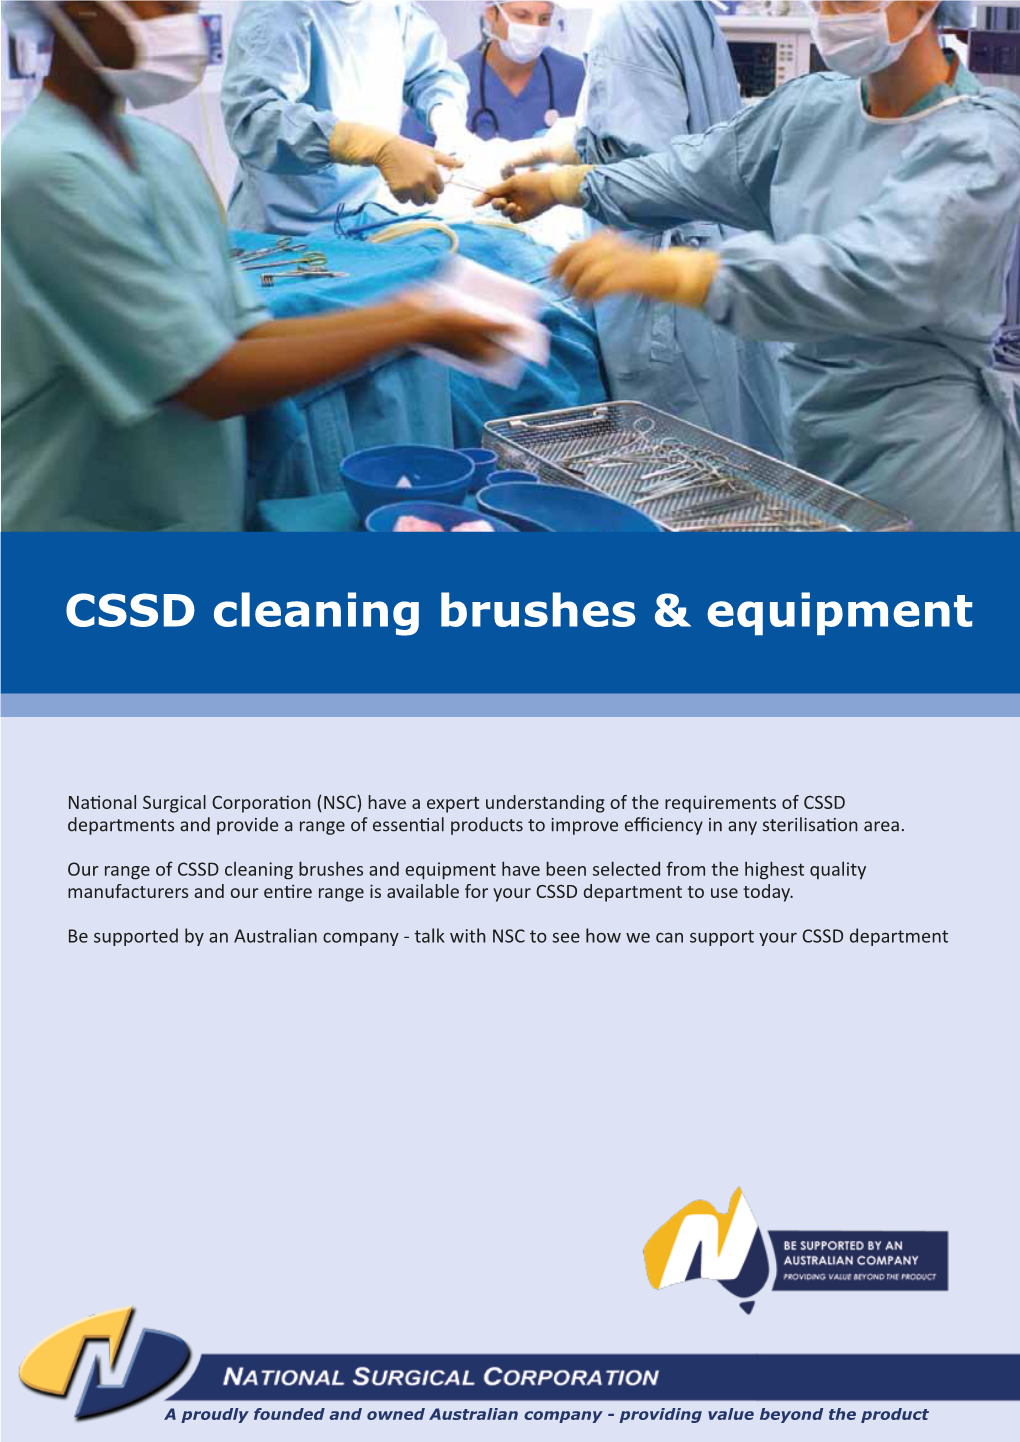 CSSD Cleaning Brushes & Equipment